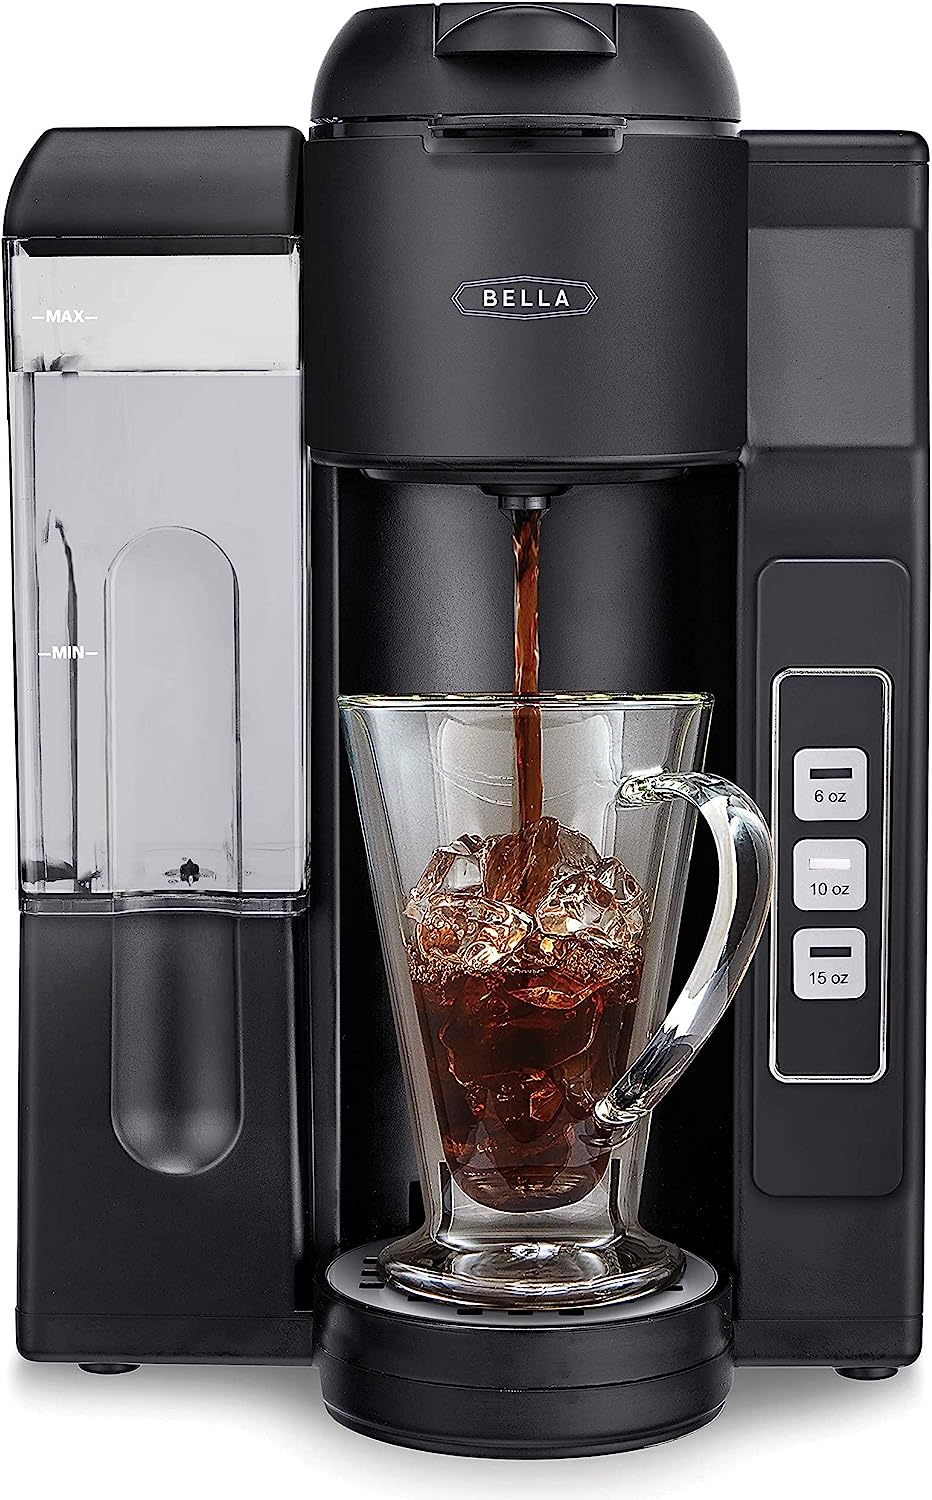 https://bigbigmart.com/wp-content/uploads/2023/07/BELLA-Single-Serve-Coffee-Maker-Dual-Brew-K-cup-Compatible-Ground-Coffee-Brewer-with-Removable-Water-Tank-Adjustable-Drip-Tray-Perfect-for-Travel.jpg